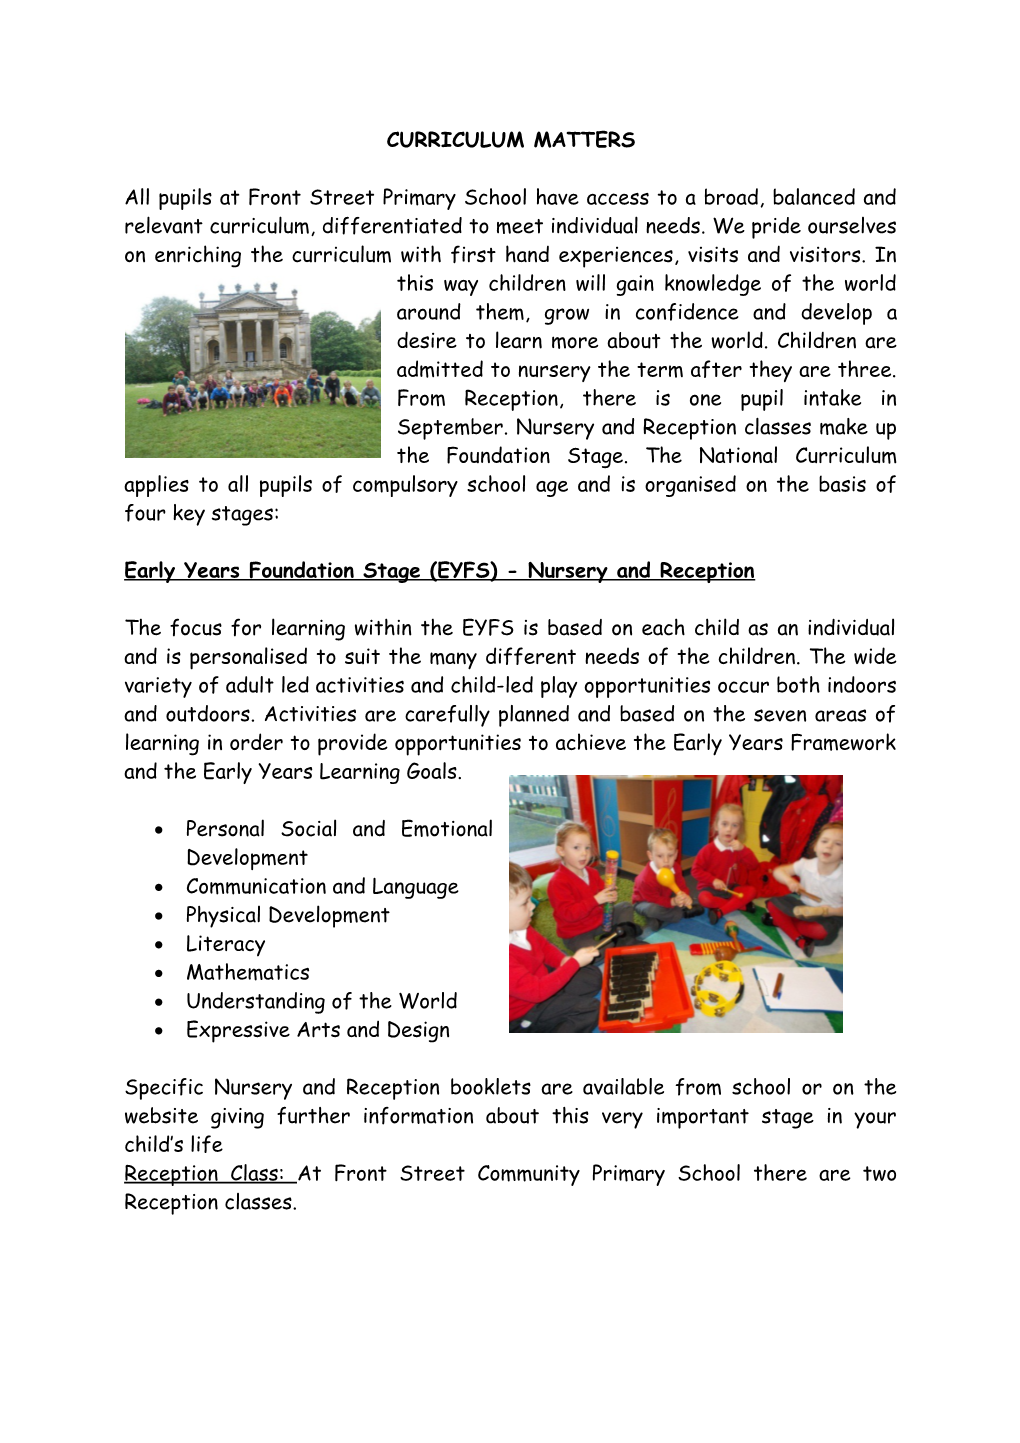 Early Years Foundation Stage (EYFS) - Nursery and Reception